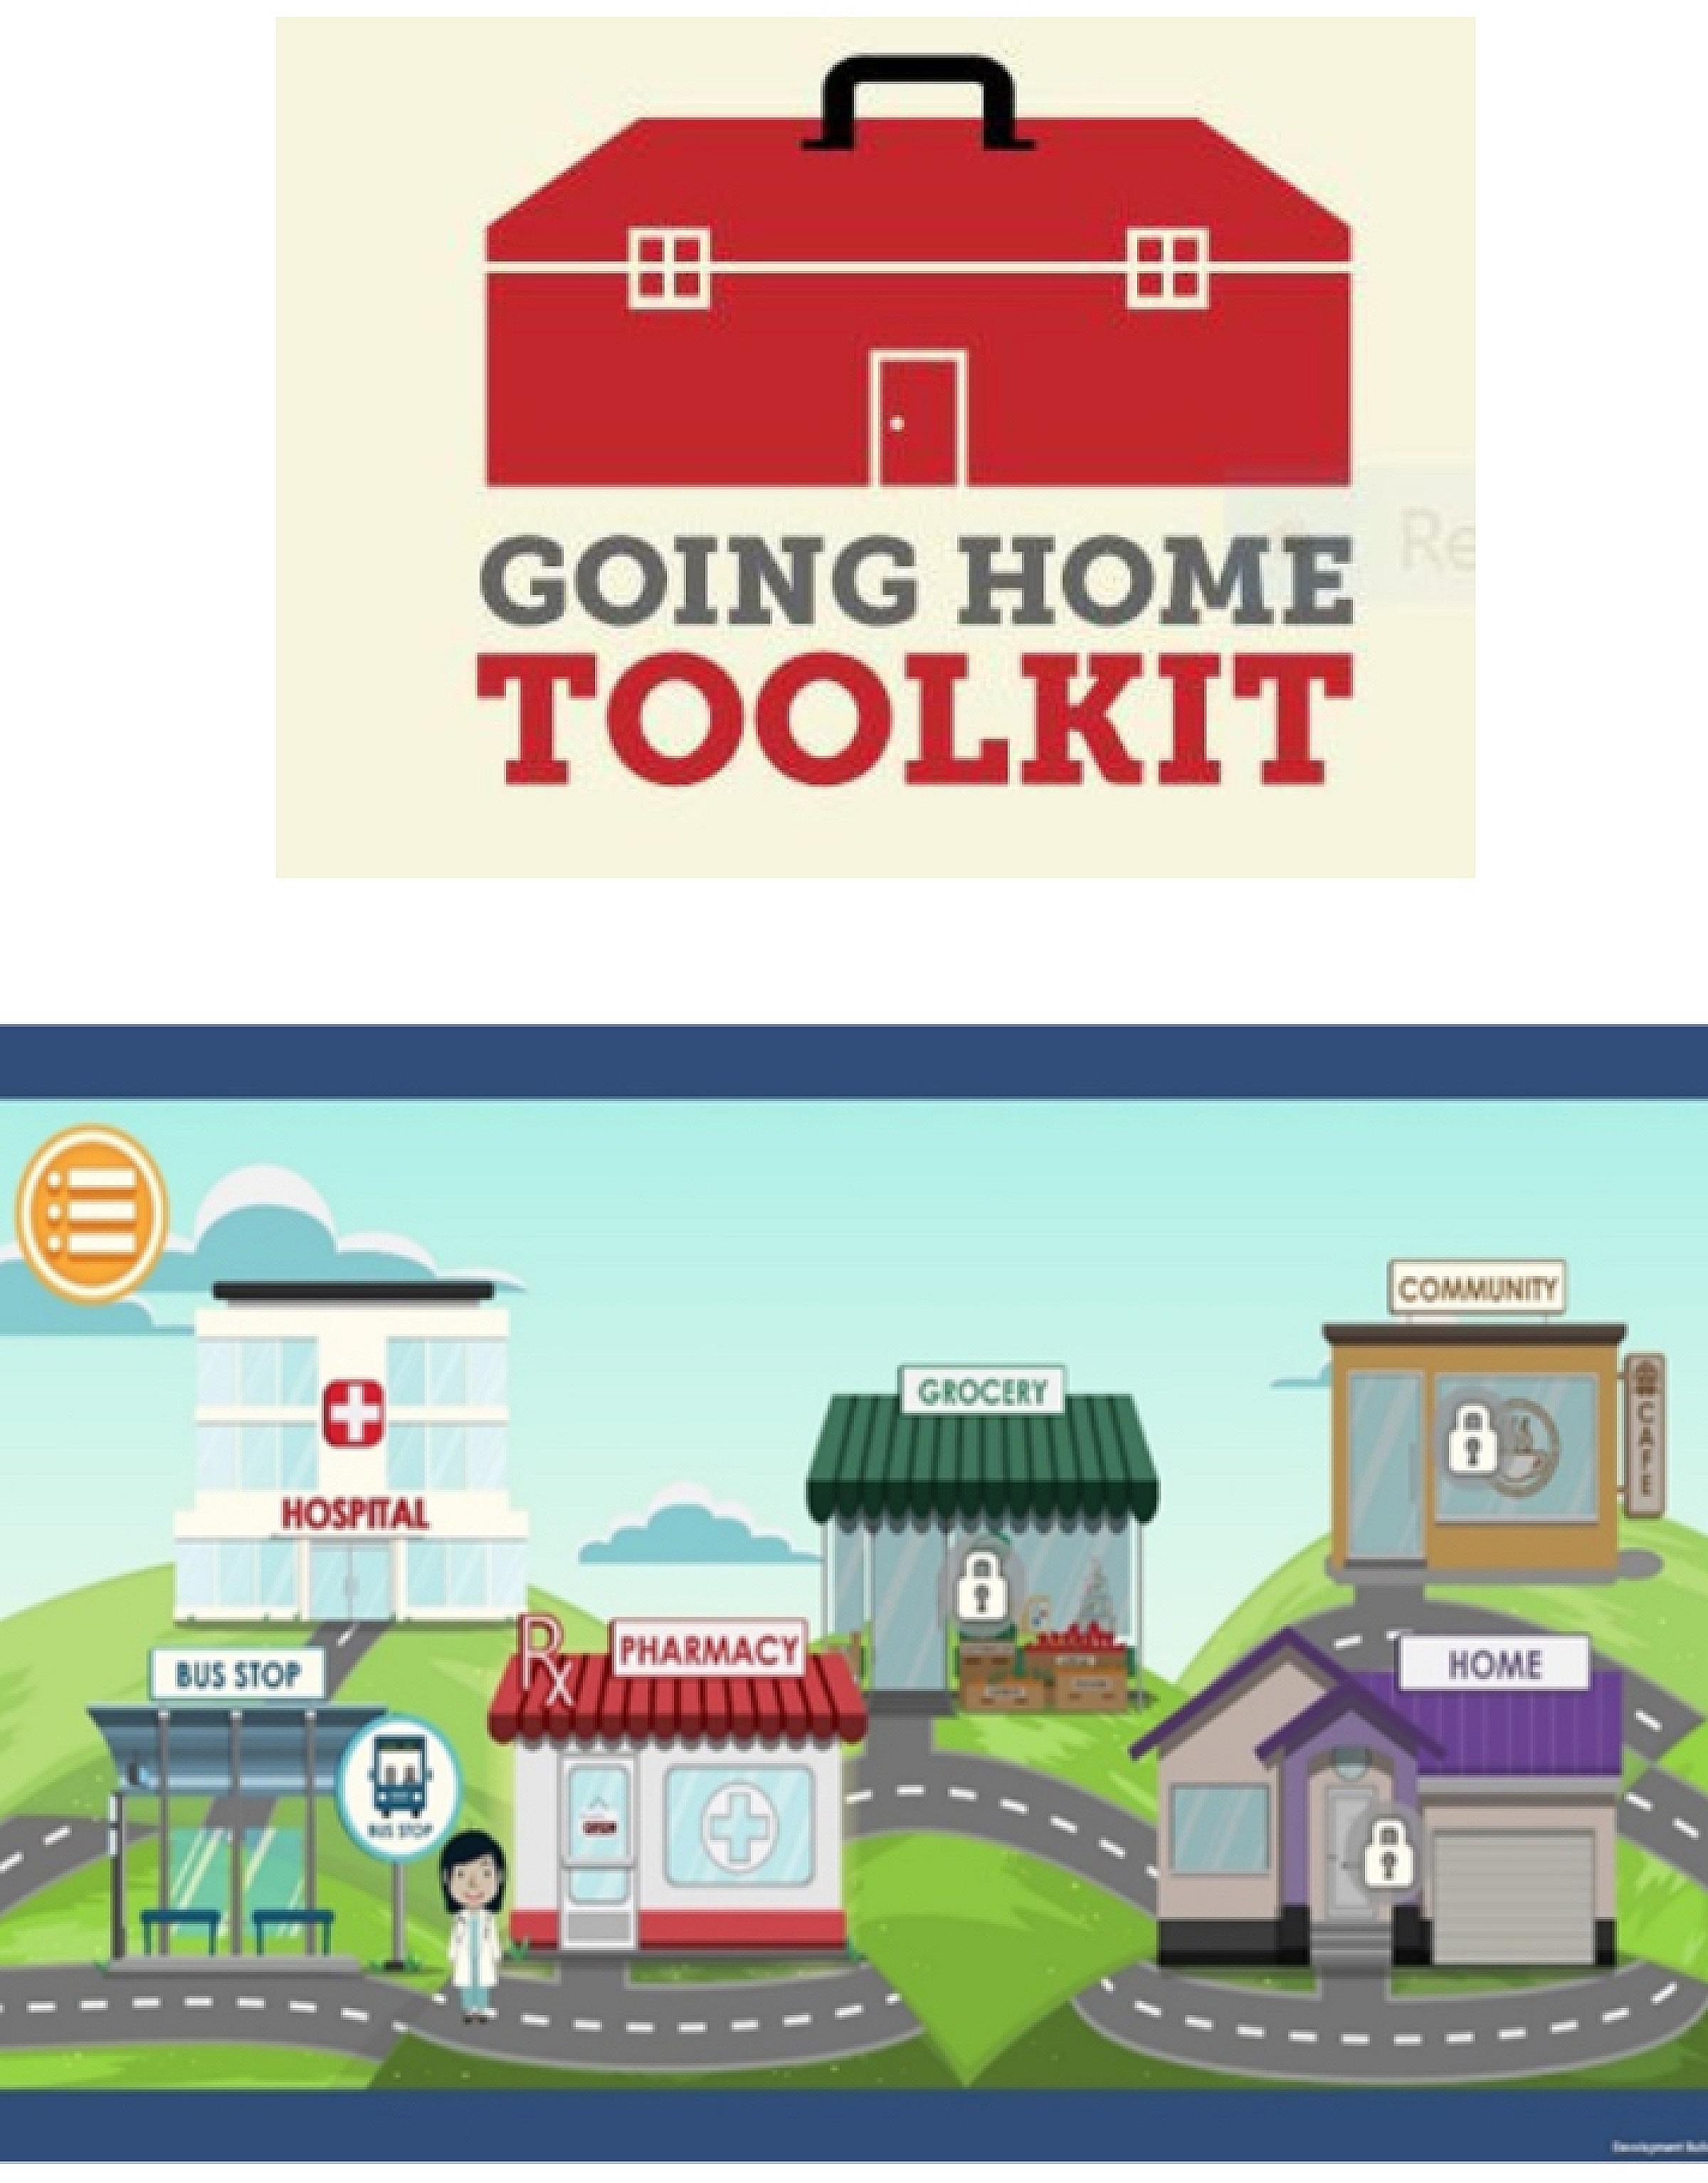 Going Home Toolkit logo above a cartoon village with a bus stop, pharmacy, grocery store and other buildings.